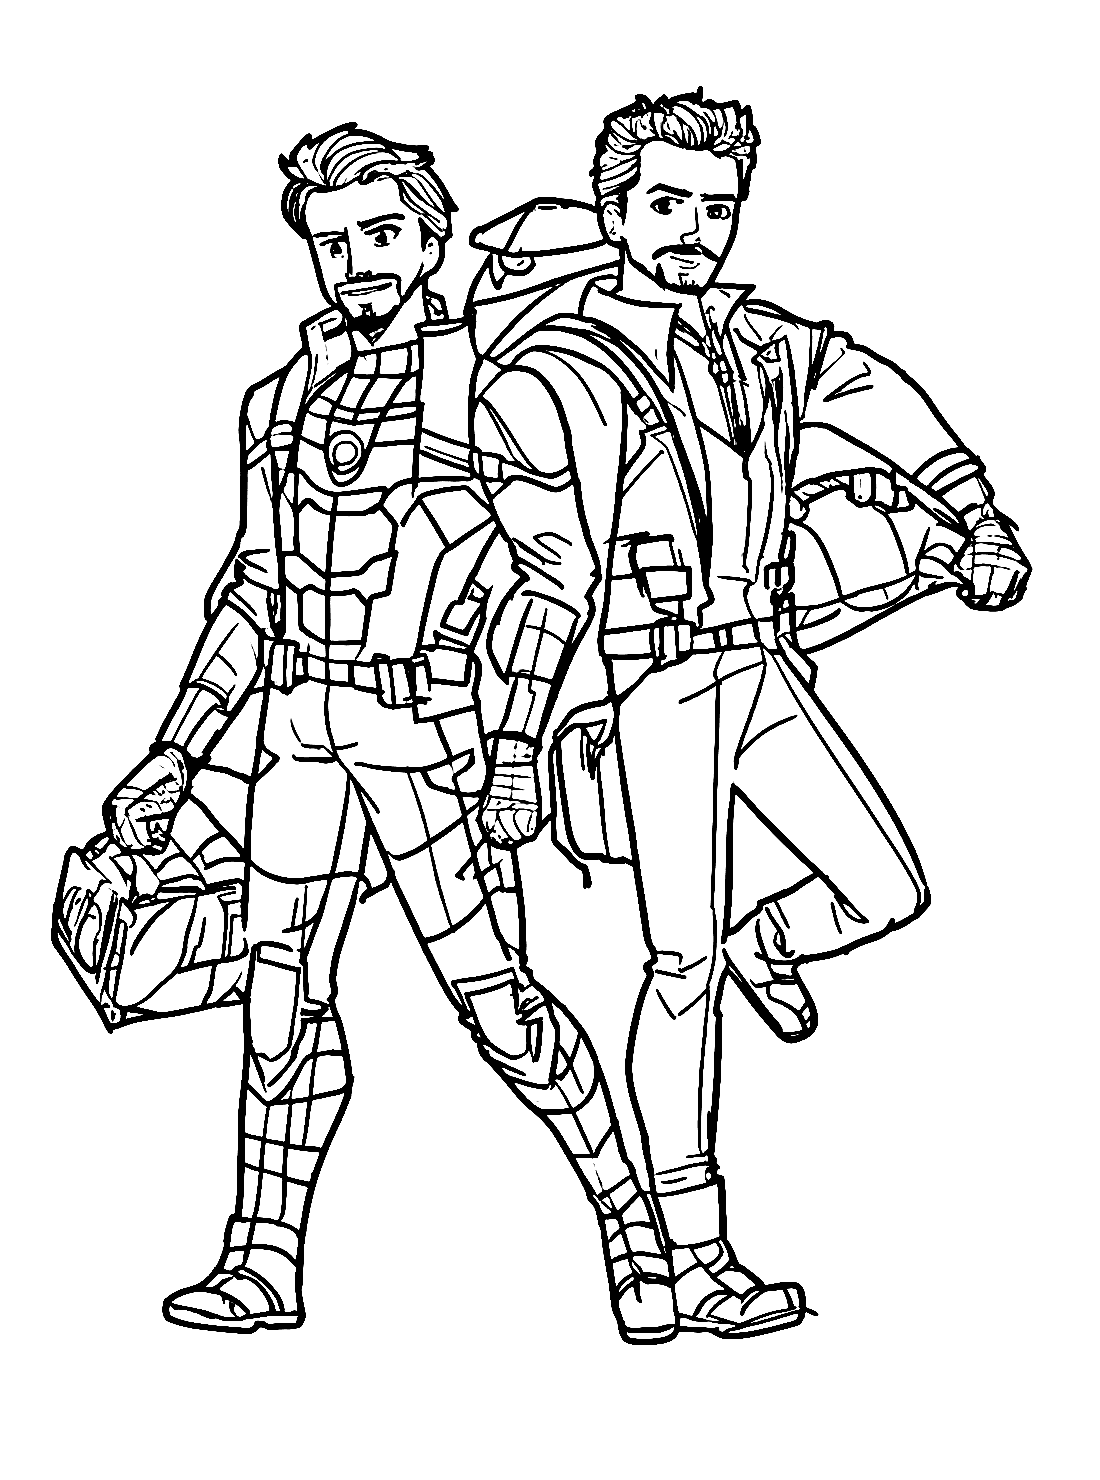 Peter Parker and Tony Stark - Coloring Online Free